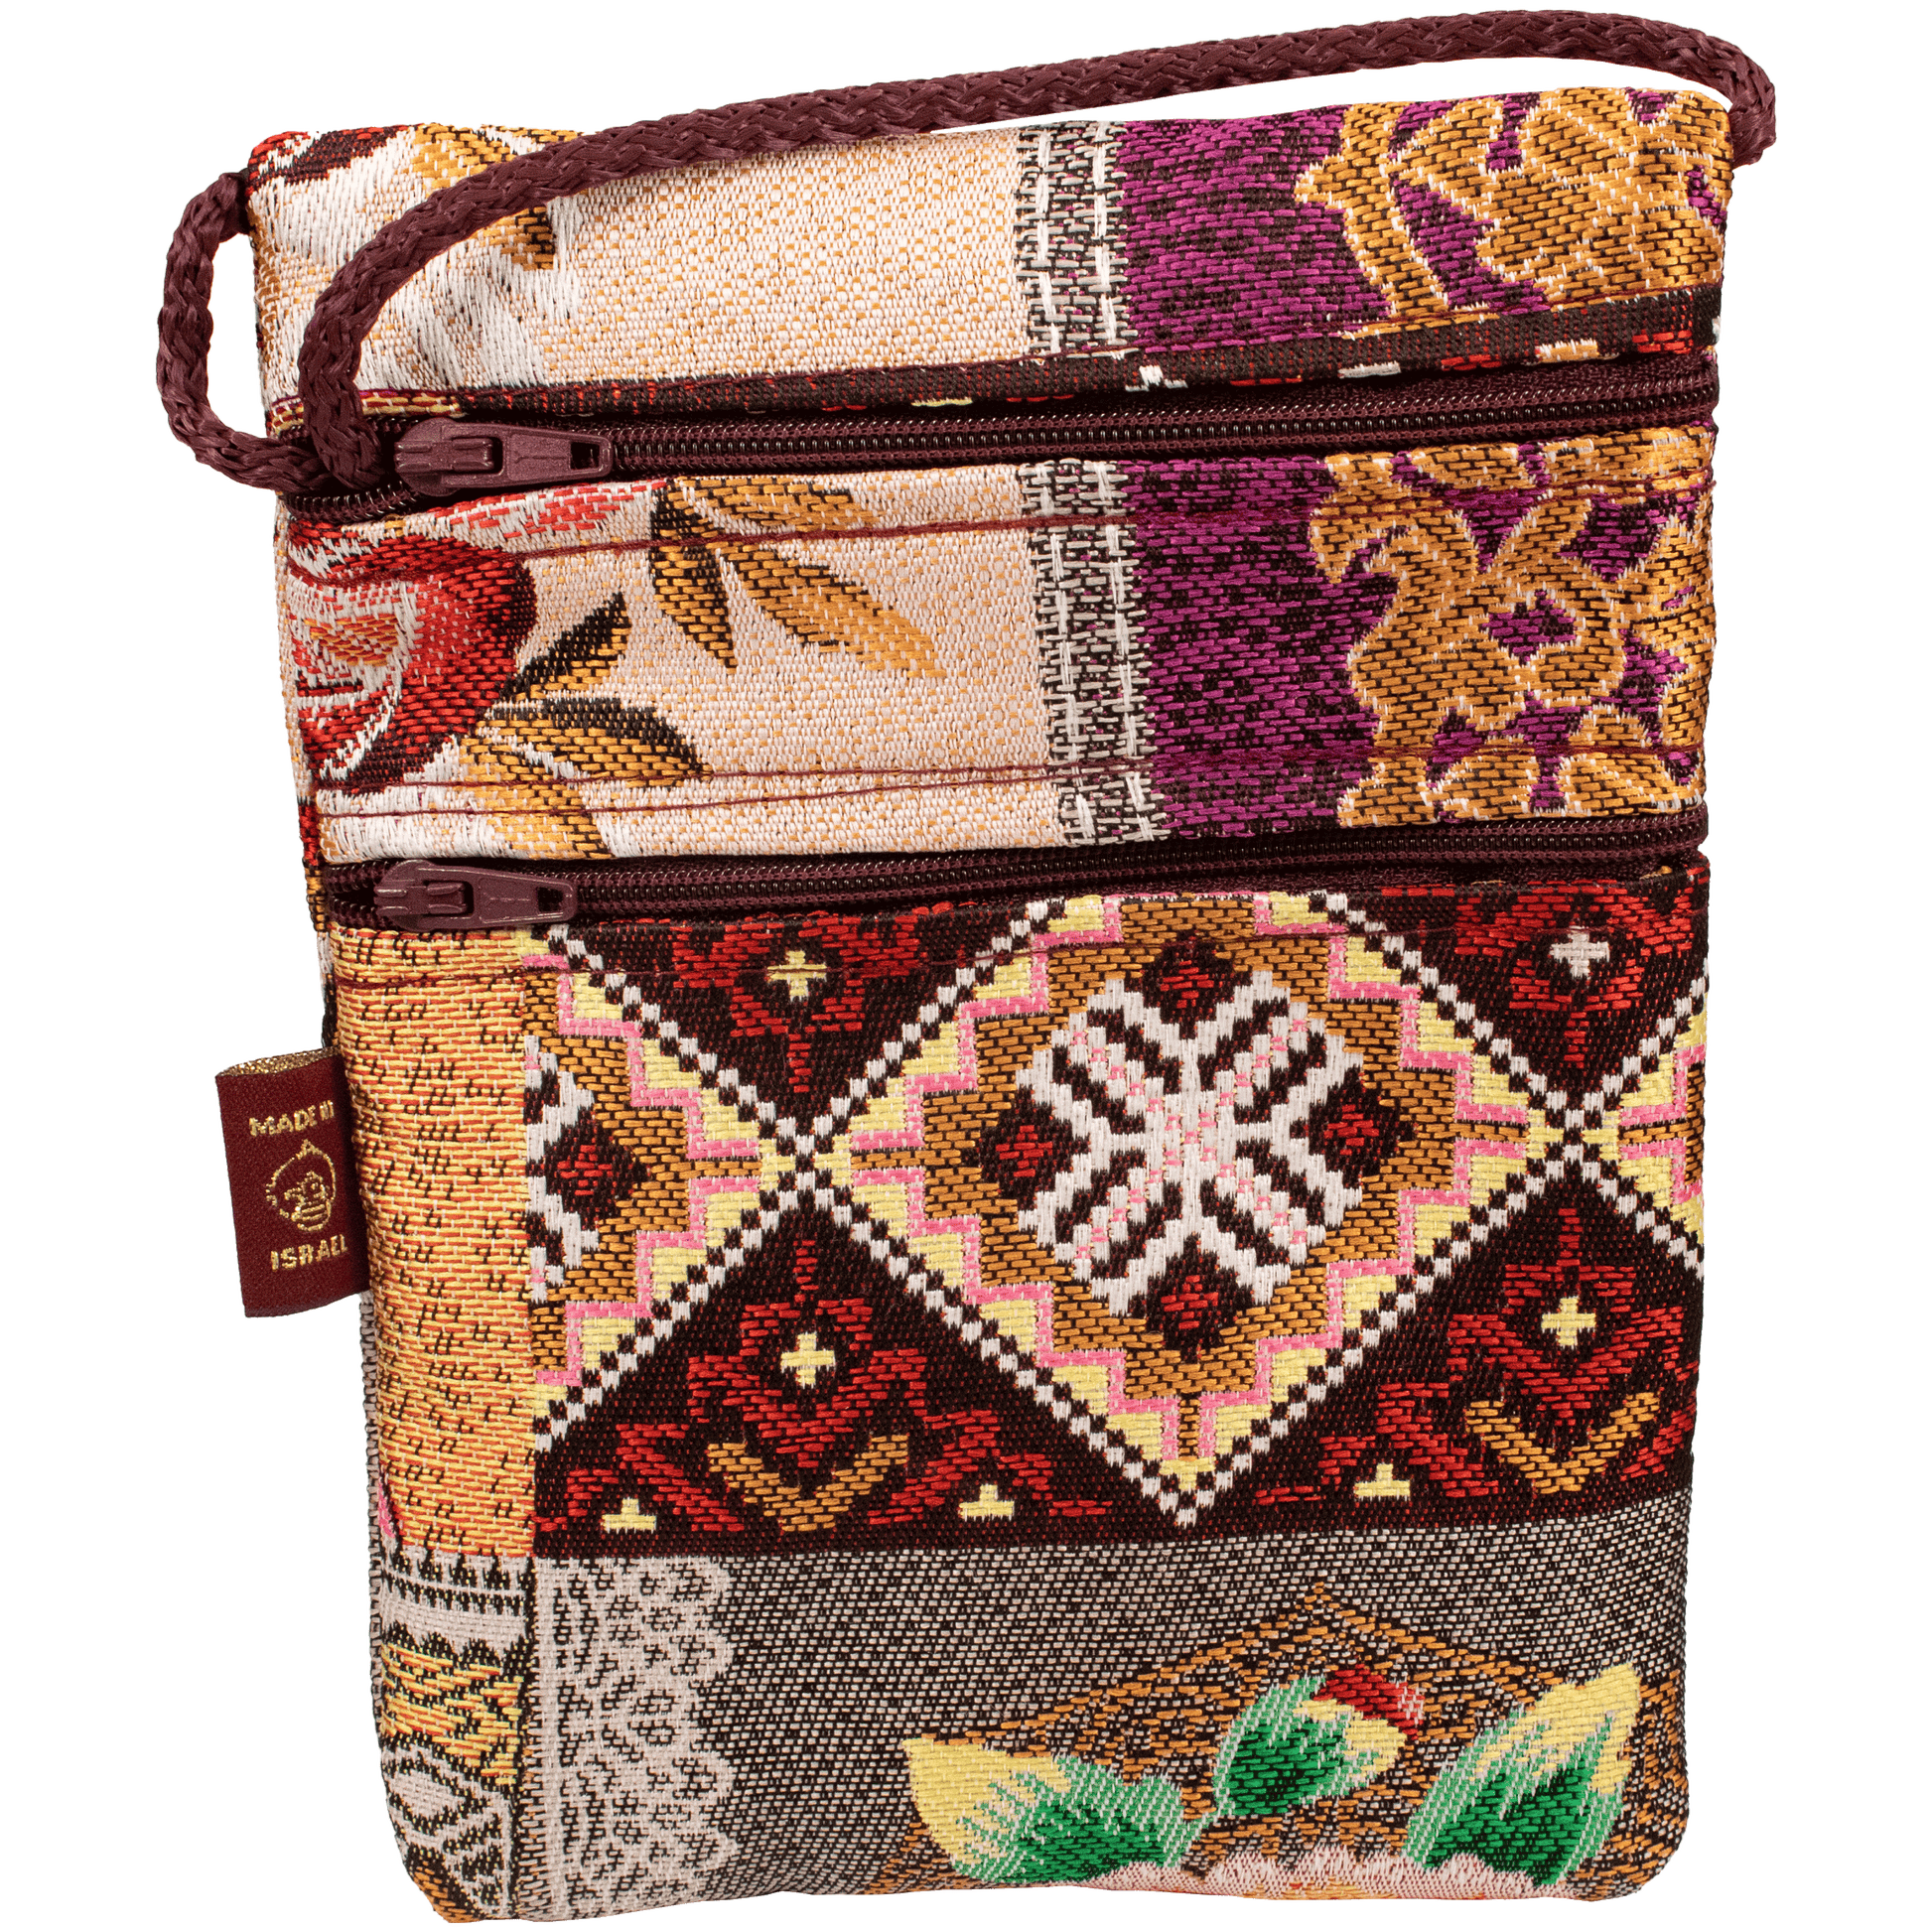 Crossbody Purse with various designs floral patchwork pattern